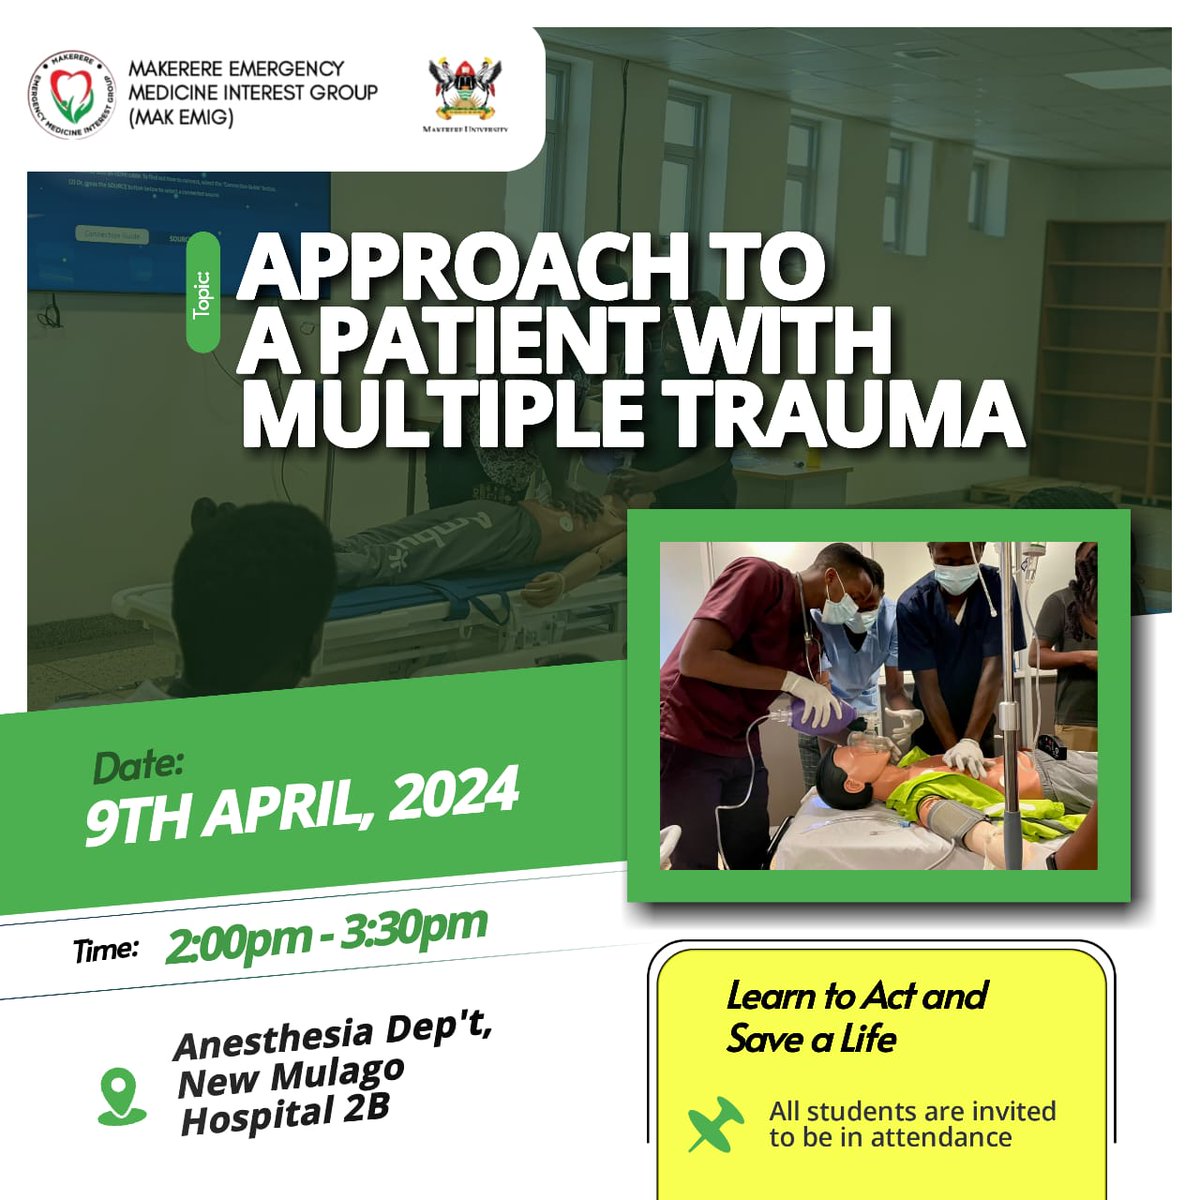 Come join us and get yourself skilled in yet another hands-on session. #Trauma #Training